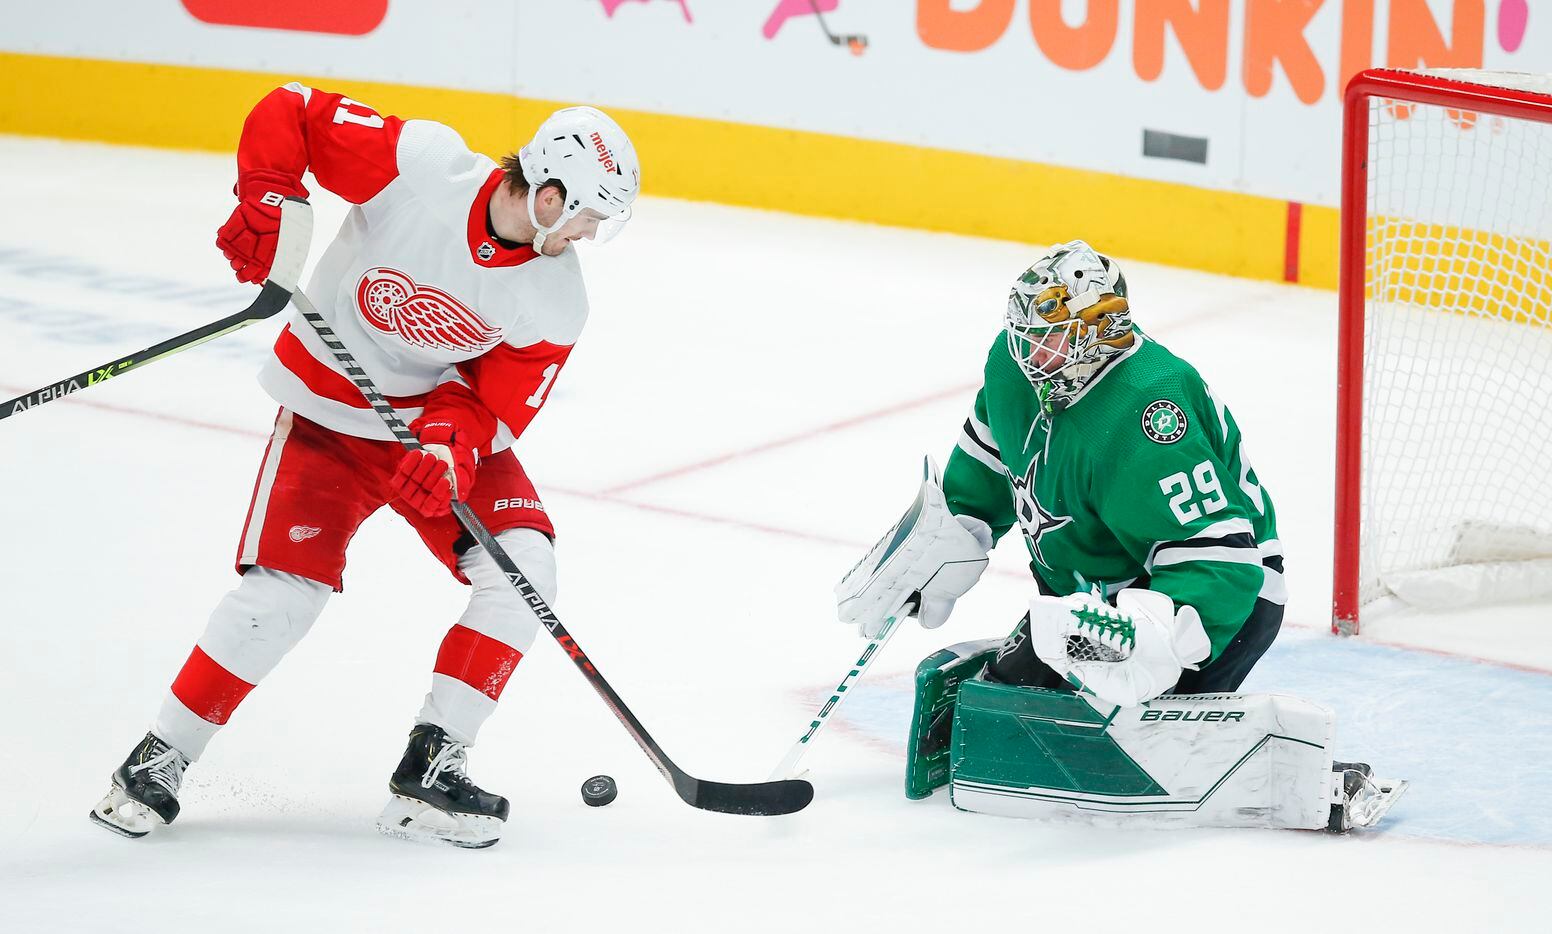 Detroit Red Wings forward Filip Zadina (11) attempts a shot as Dallas Stars goaltender Jake Oettinger (29) defends during the third period of an NHL hockey game, Tuesday, November 16, 2021. Dallas won 5-2. (Brandon Wade/Special Contributor)